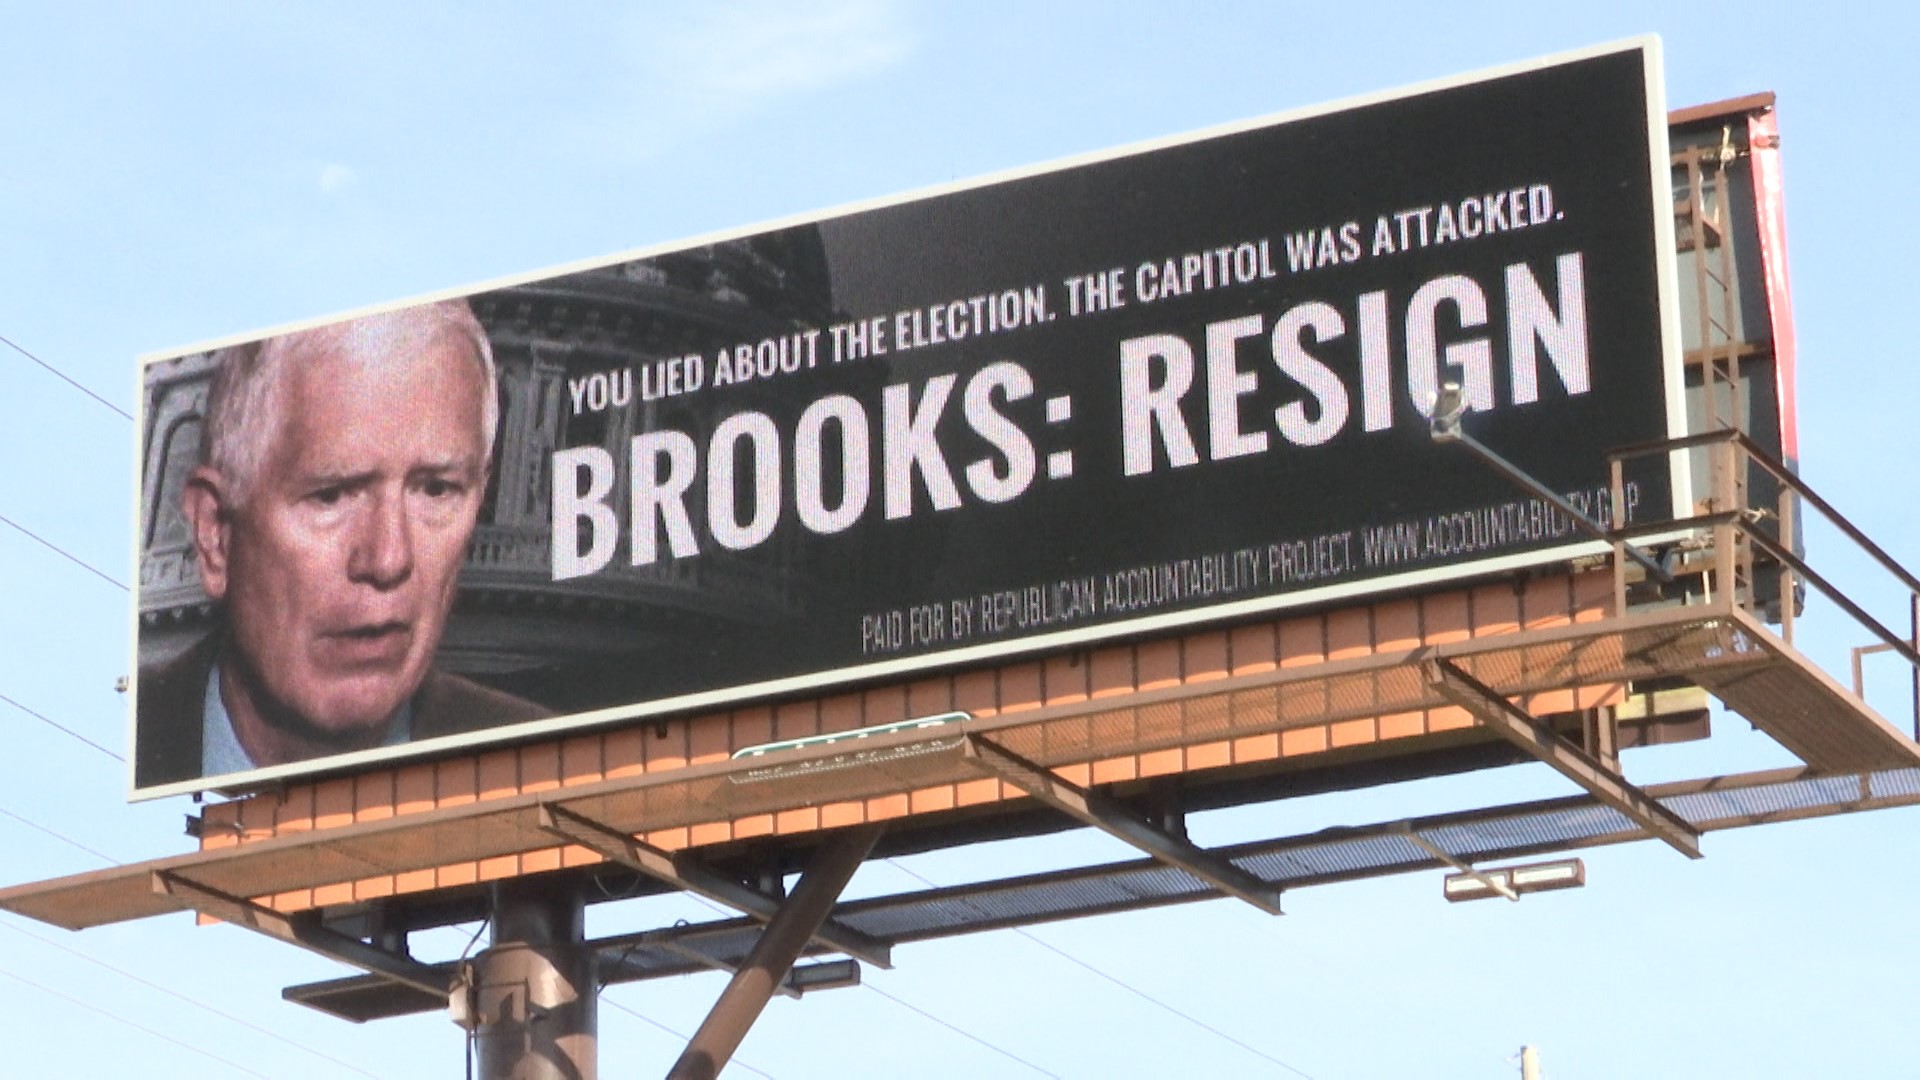 The billboard ads are backed by a national group called the Republican Accountability Project.